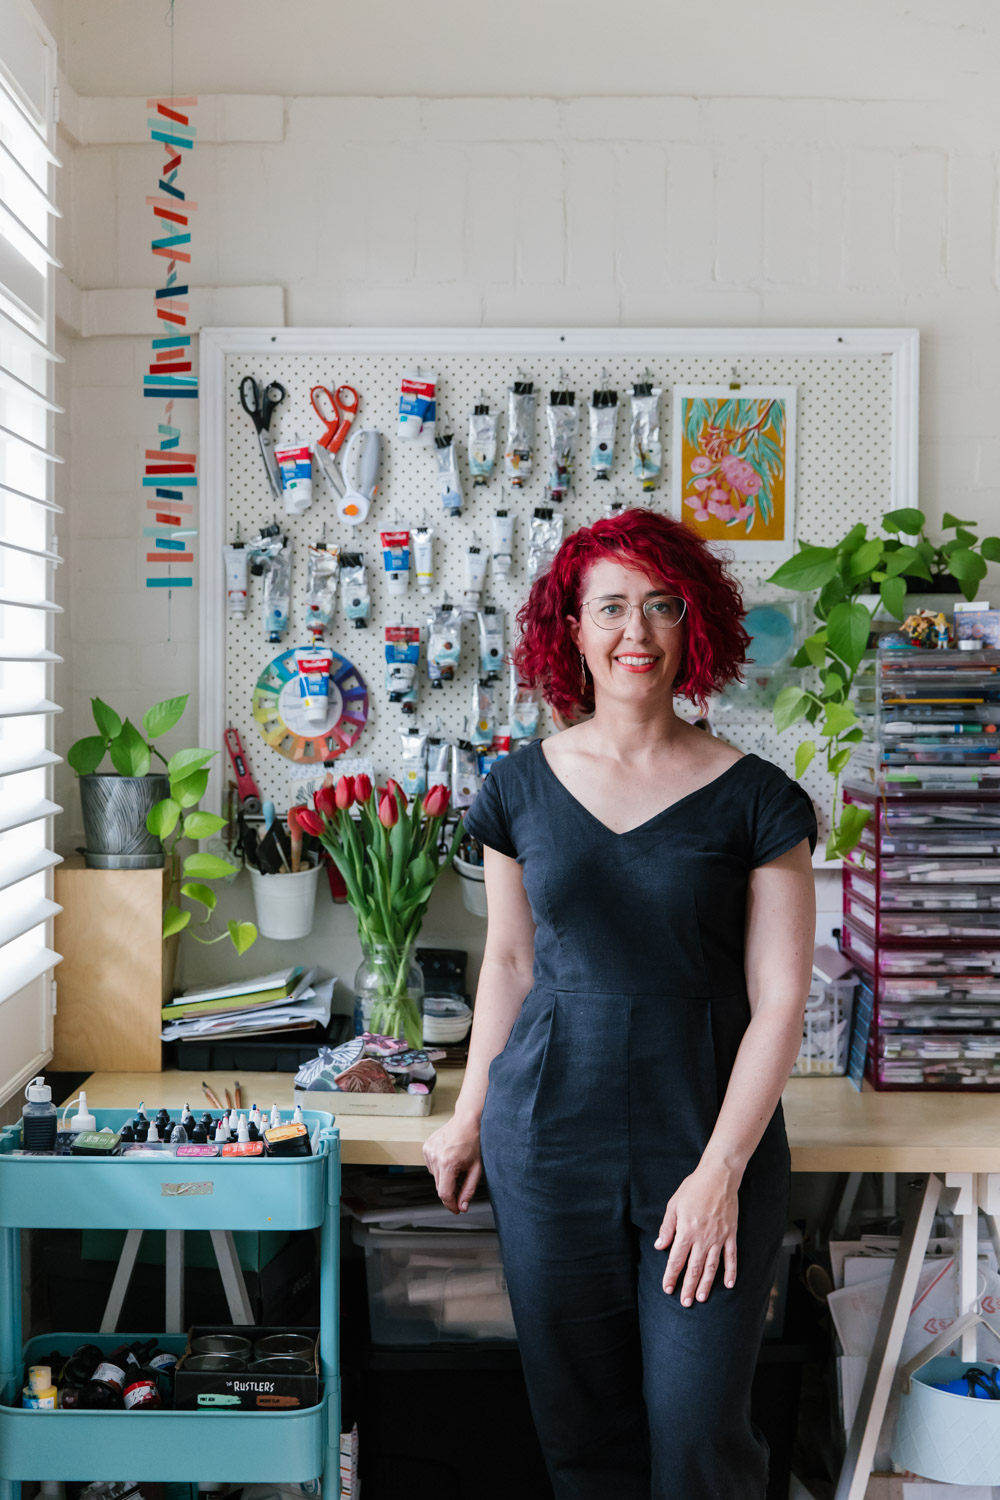 Portrait of Rowan Sivyer, a white woman with bright red hair wearing a black jumpsuit, standing in her home studio where she creates block printing artworks by hand